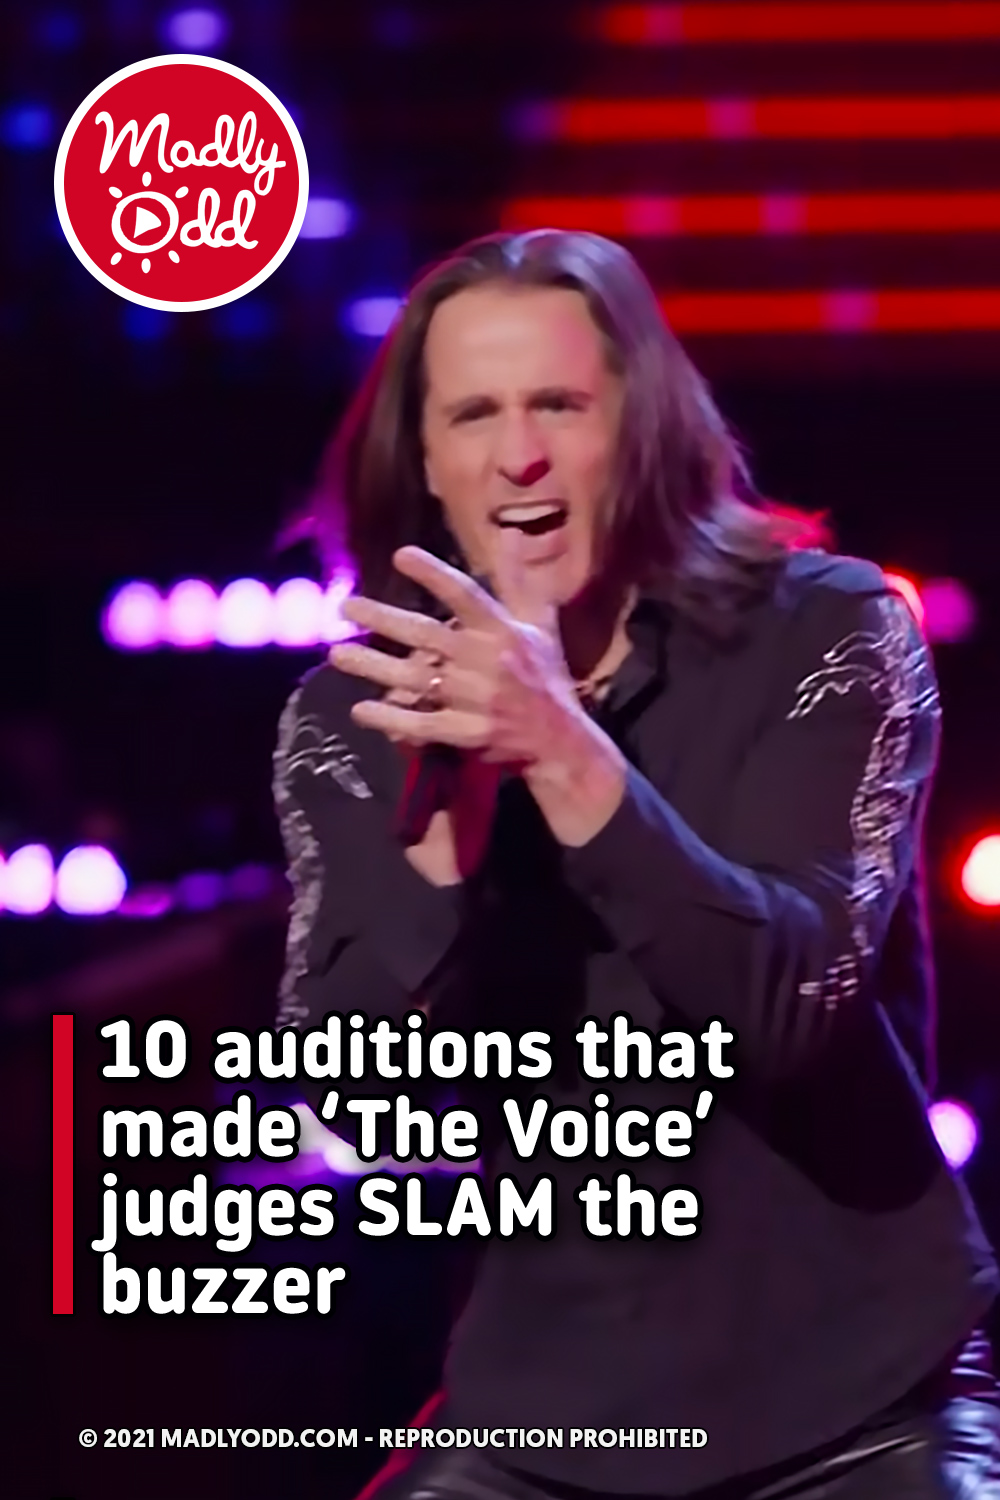 10 auditions that made ‘The Voice’ judges SLAM the buzzer